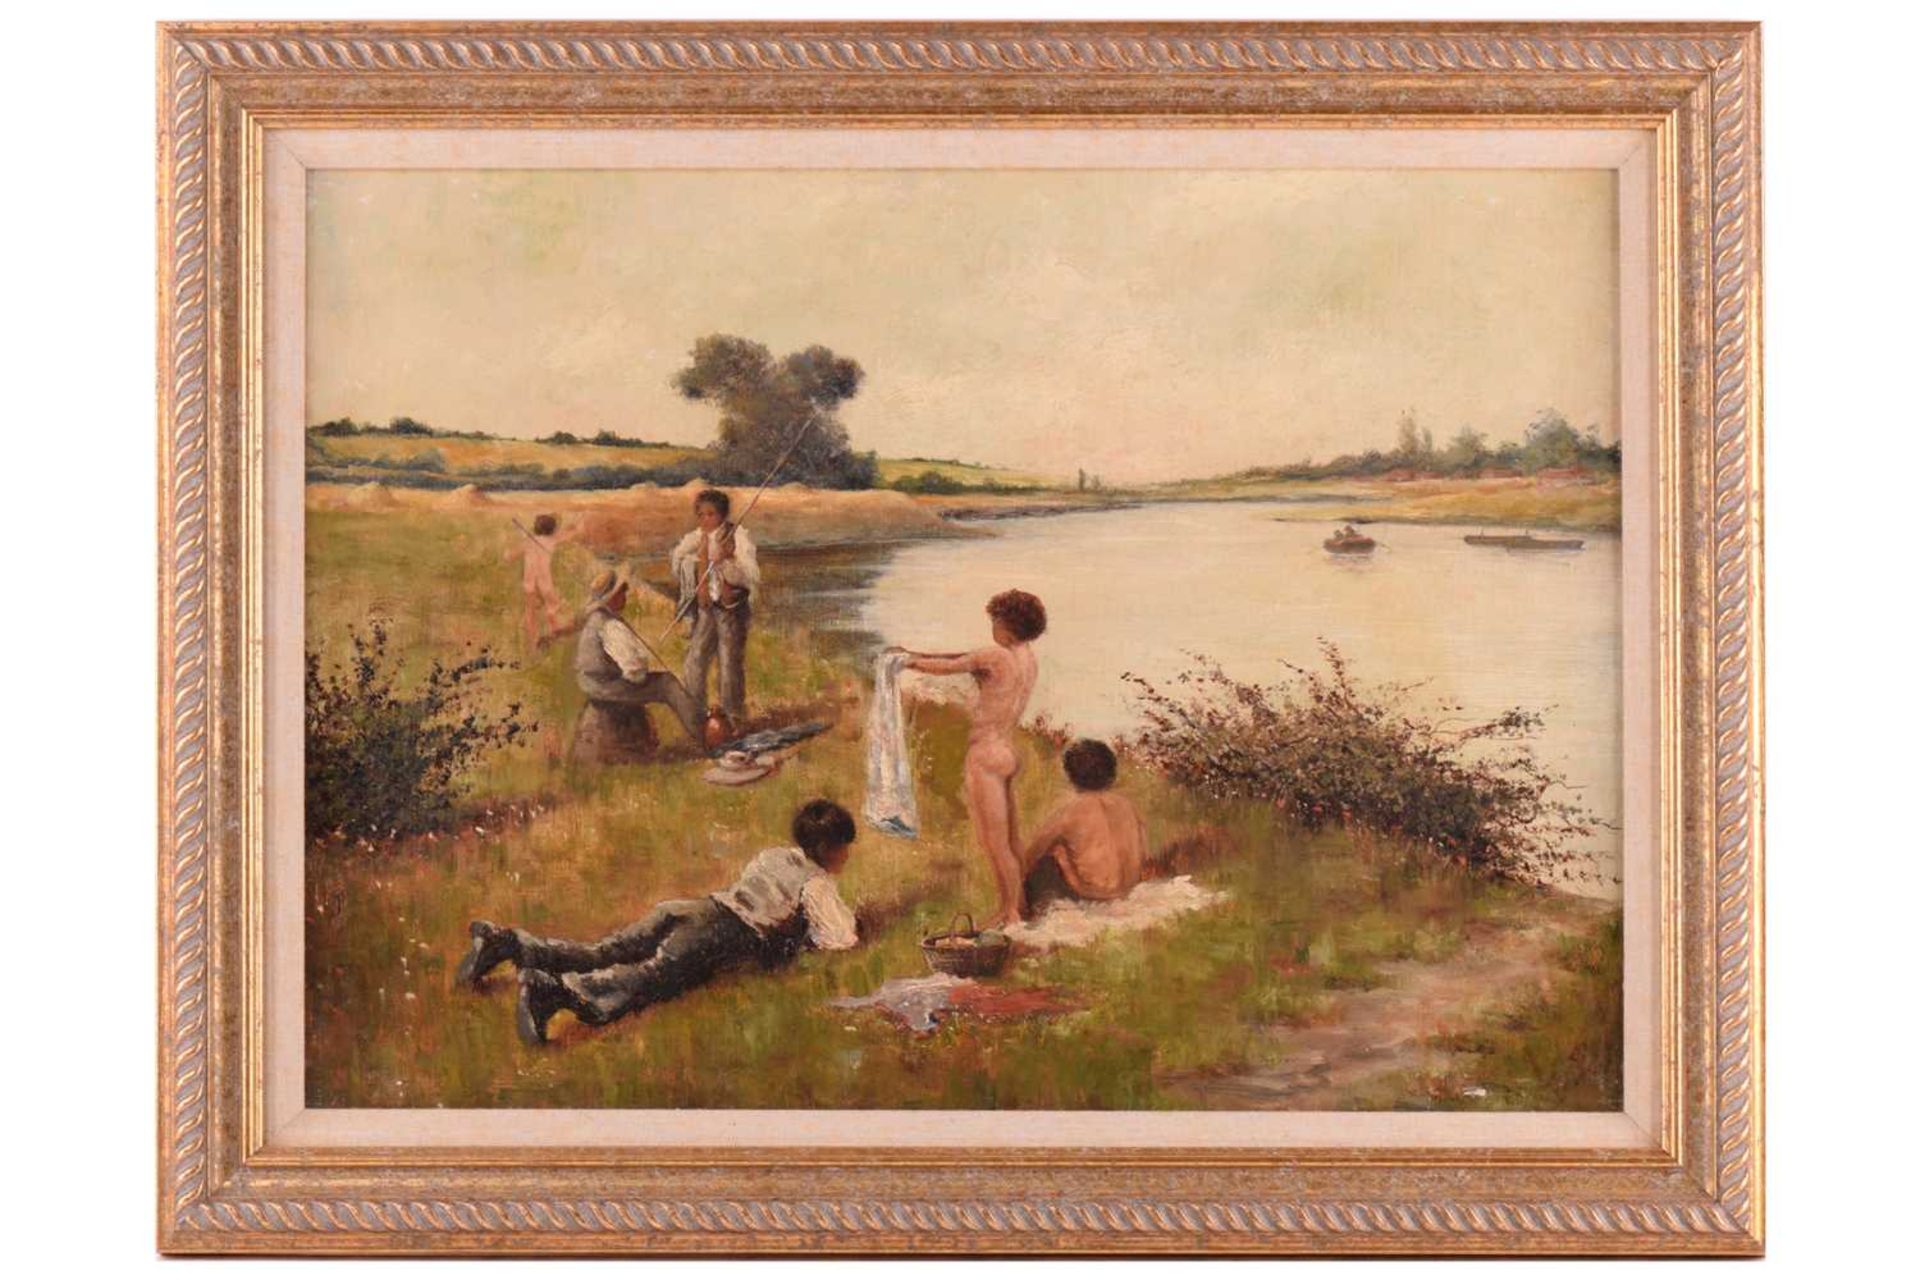 B. Baker (19th century), children beside a river on a summer's day, oil on canvas, signed verso